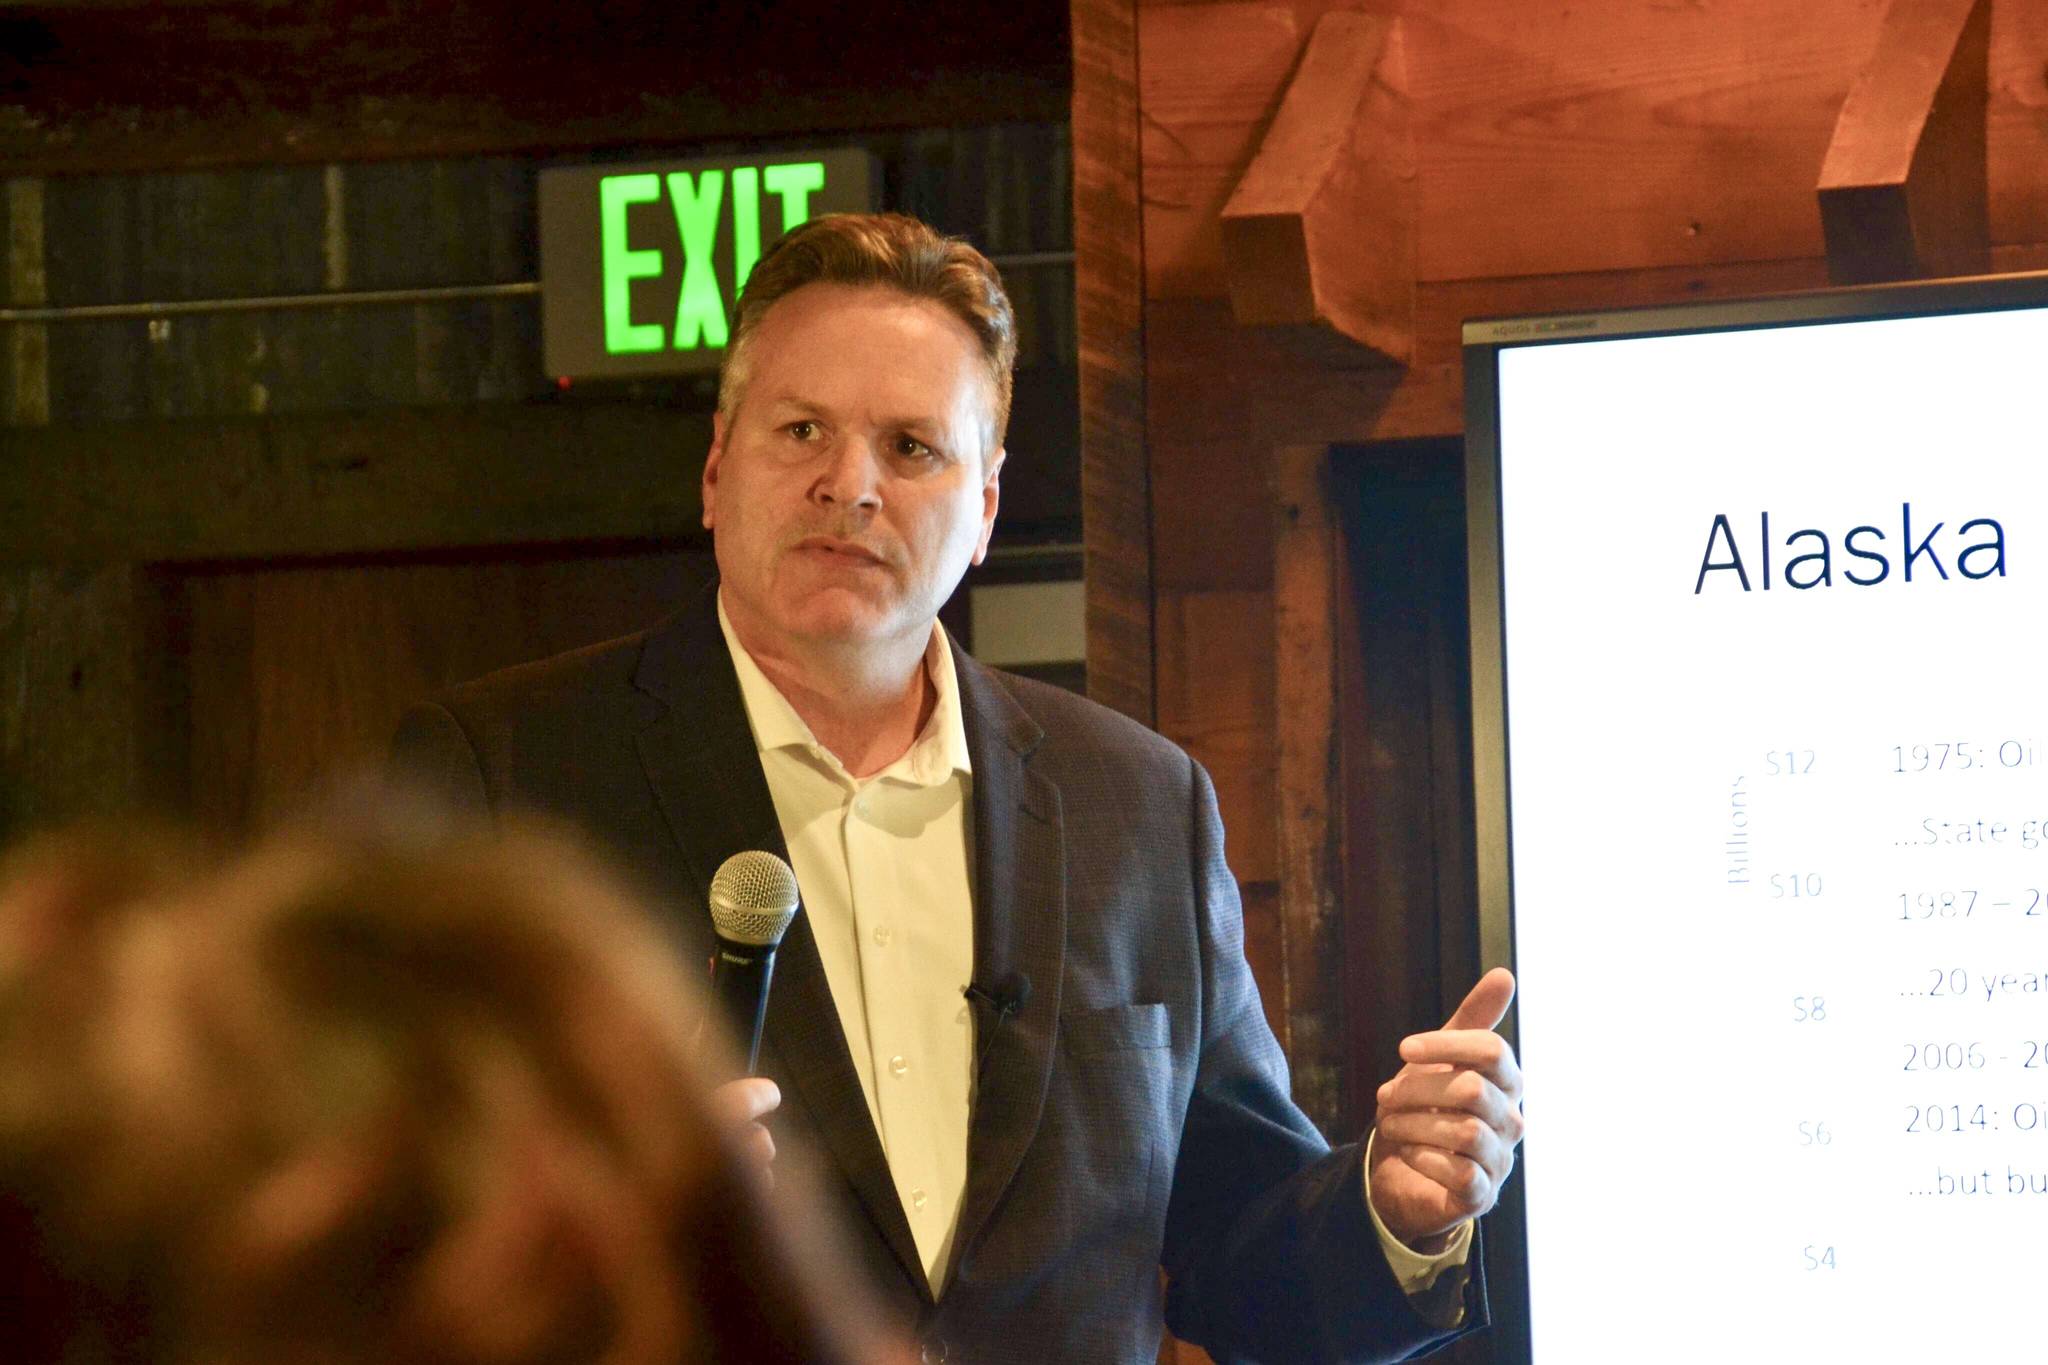 Gov. Mike Dunleavy gives a presentation about his proposed budget at the Cannery Lodge in Kenai, Alaska, on March 25, 2019. (Photo by Victoria Petersen/Peninsula Clarion)